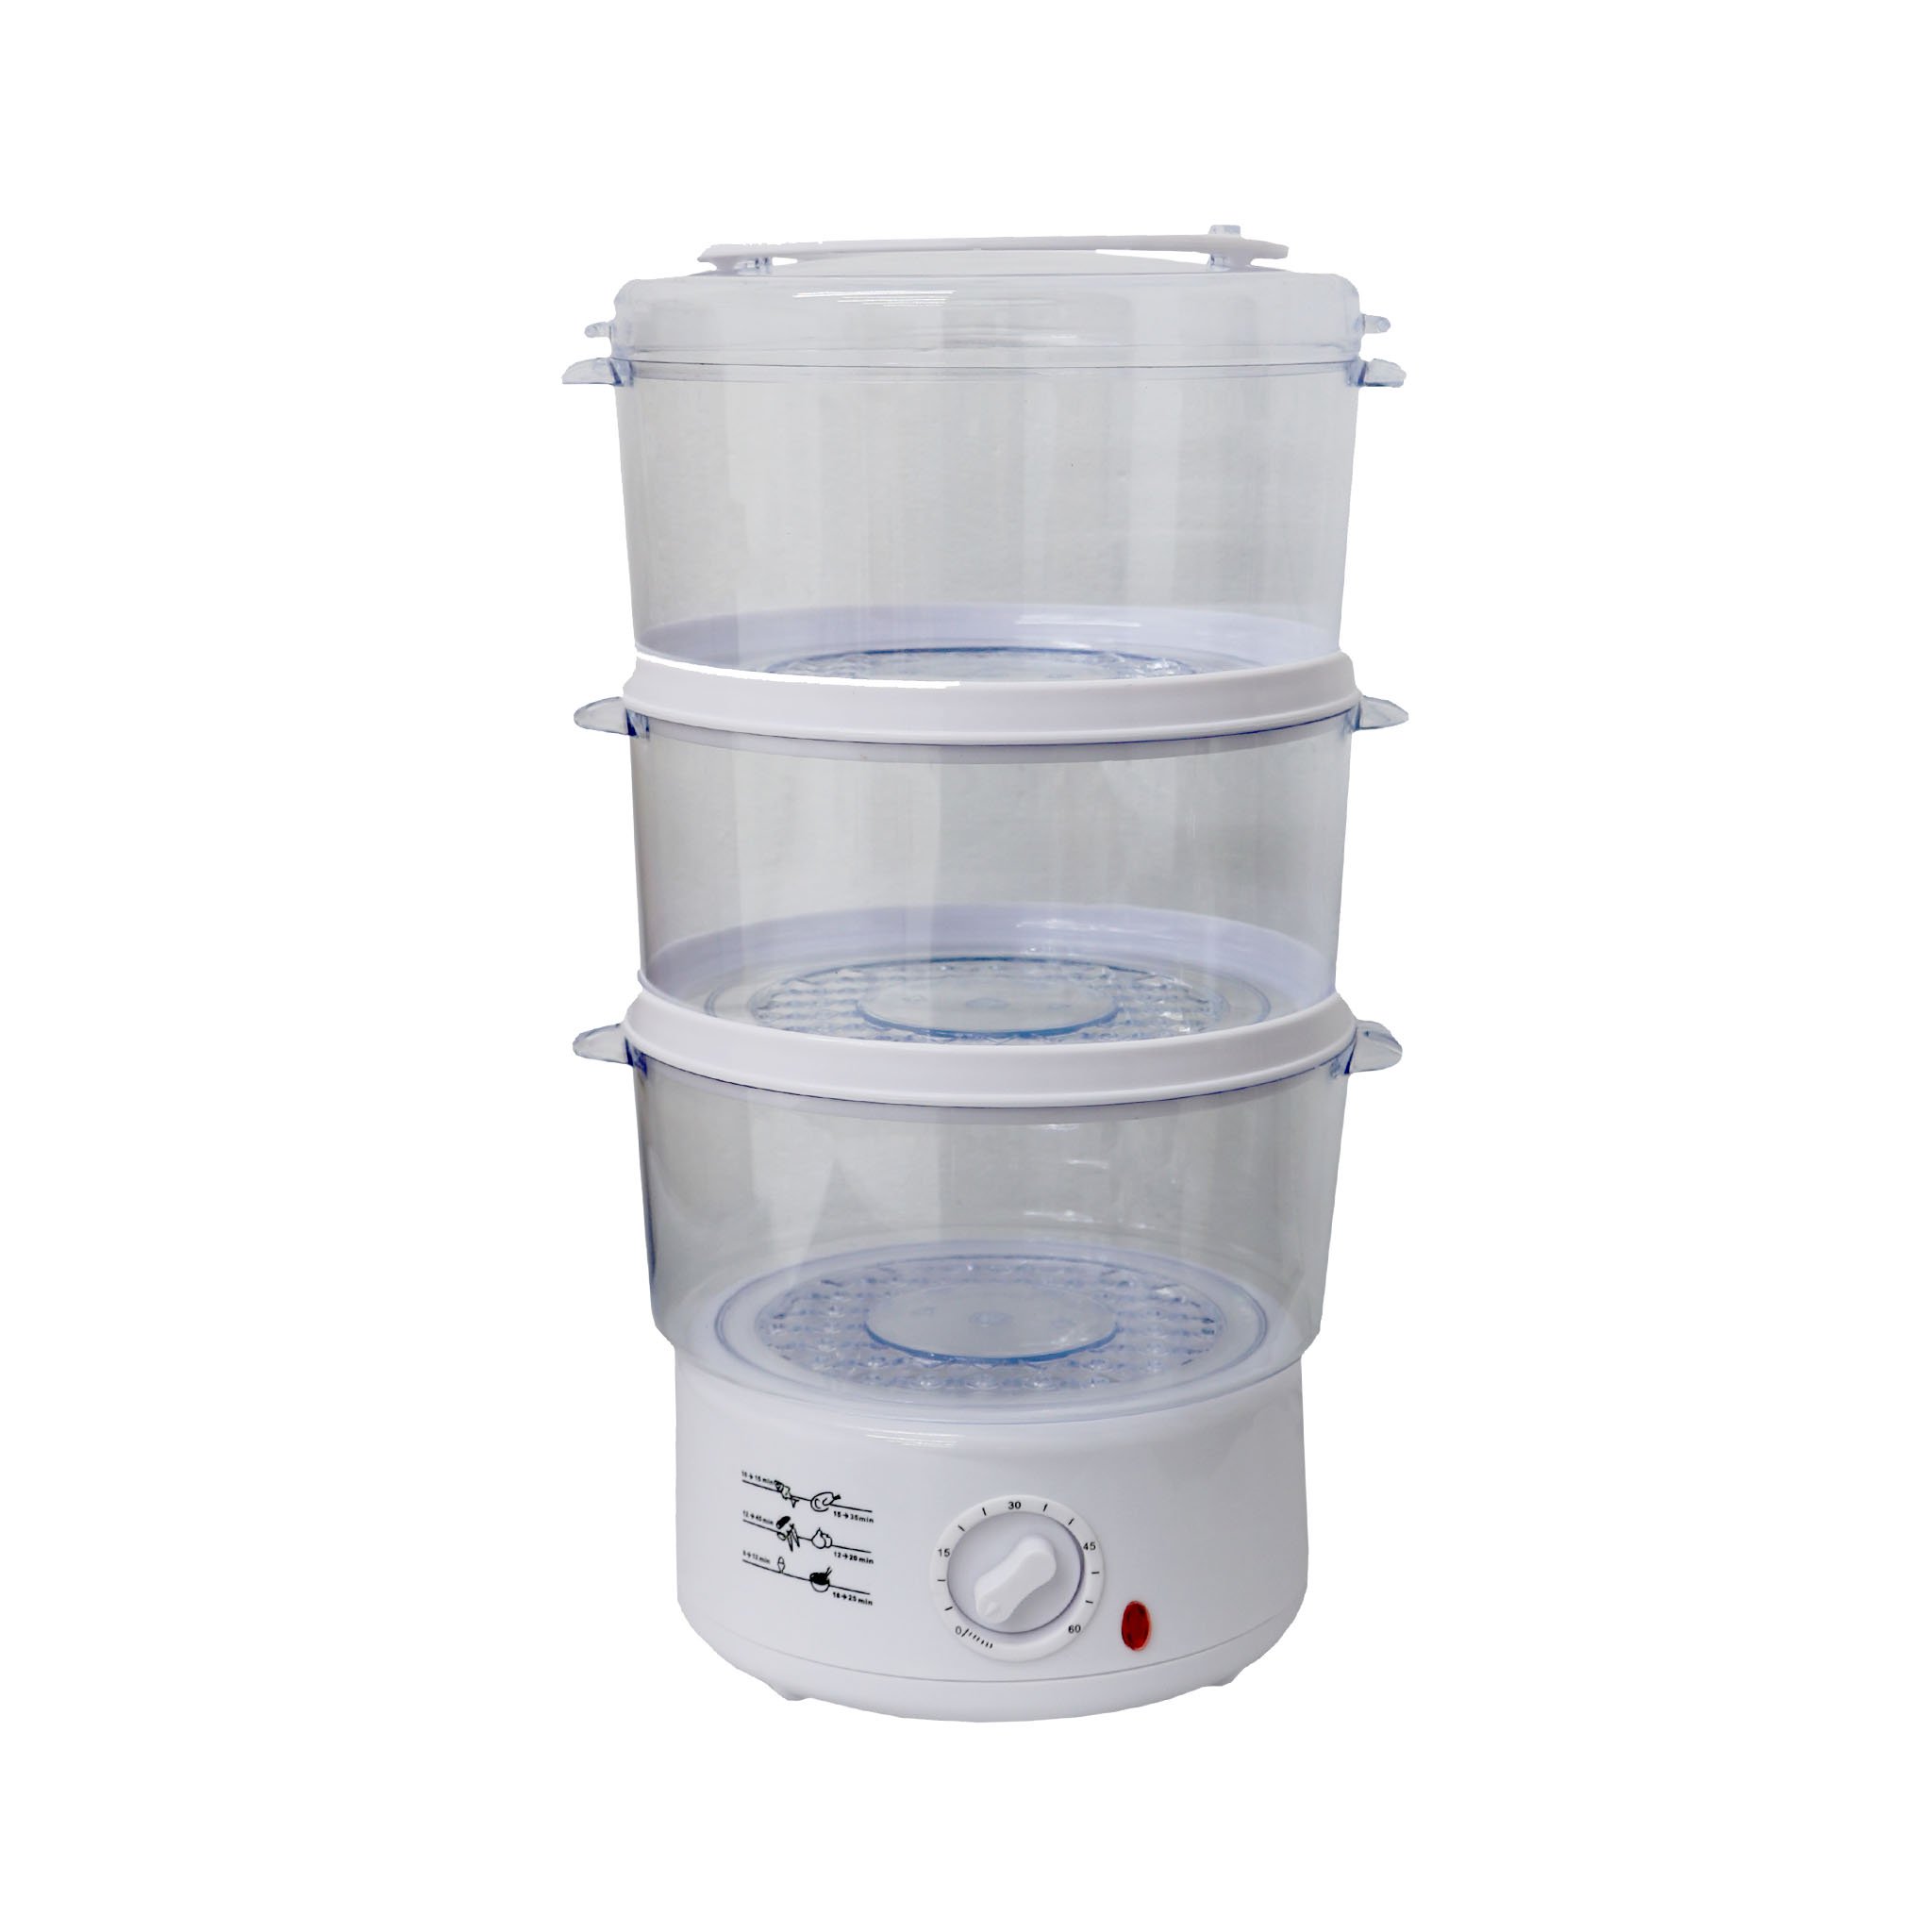 3 Layer 7.5L Compact Electric Food Steamer Steam Cooker